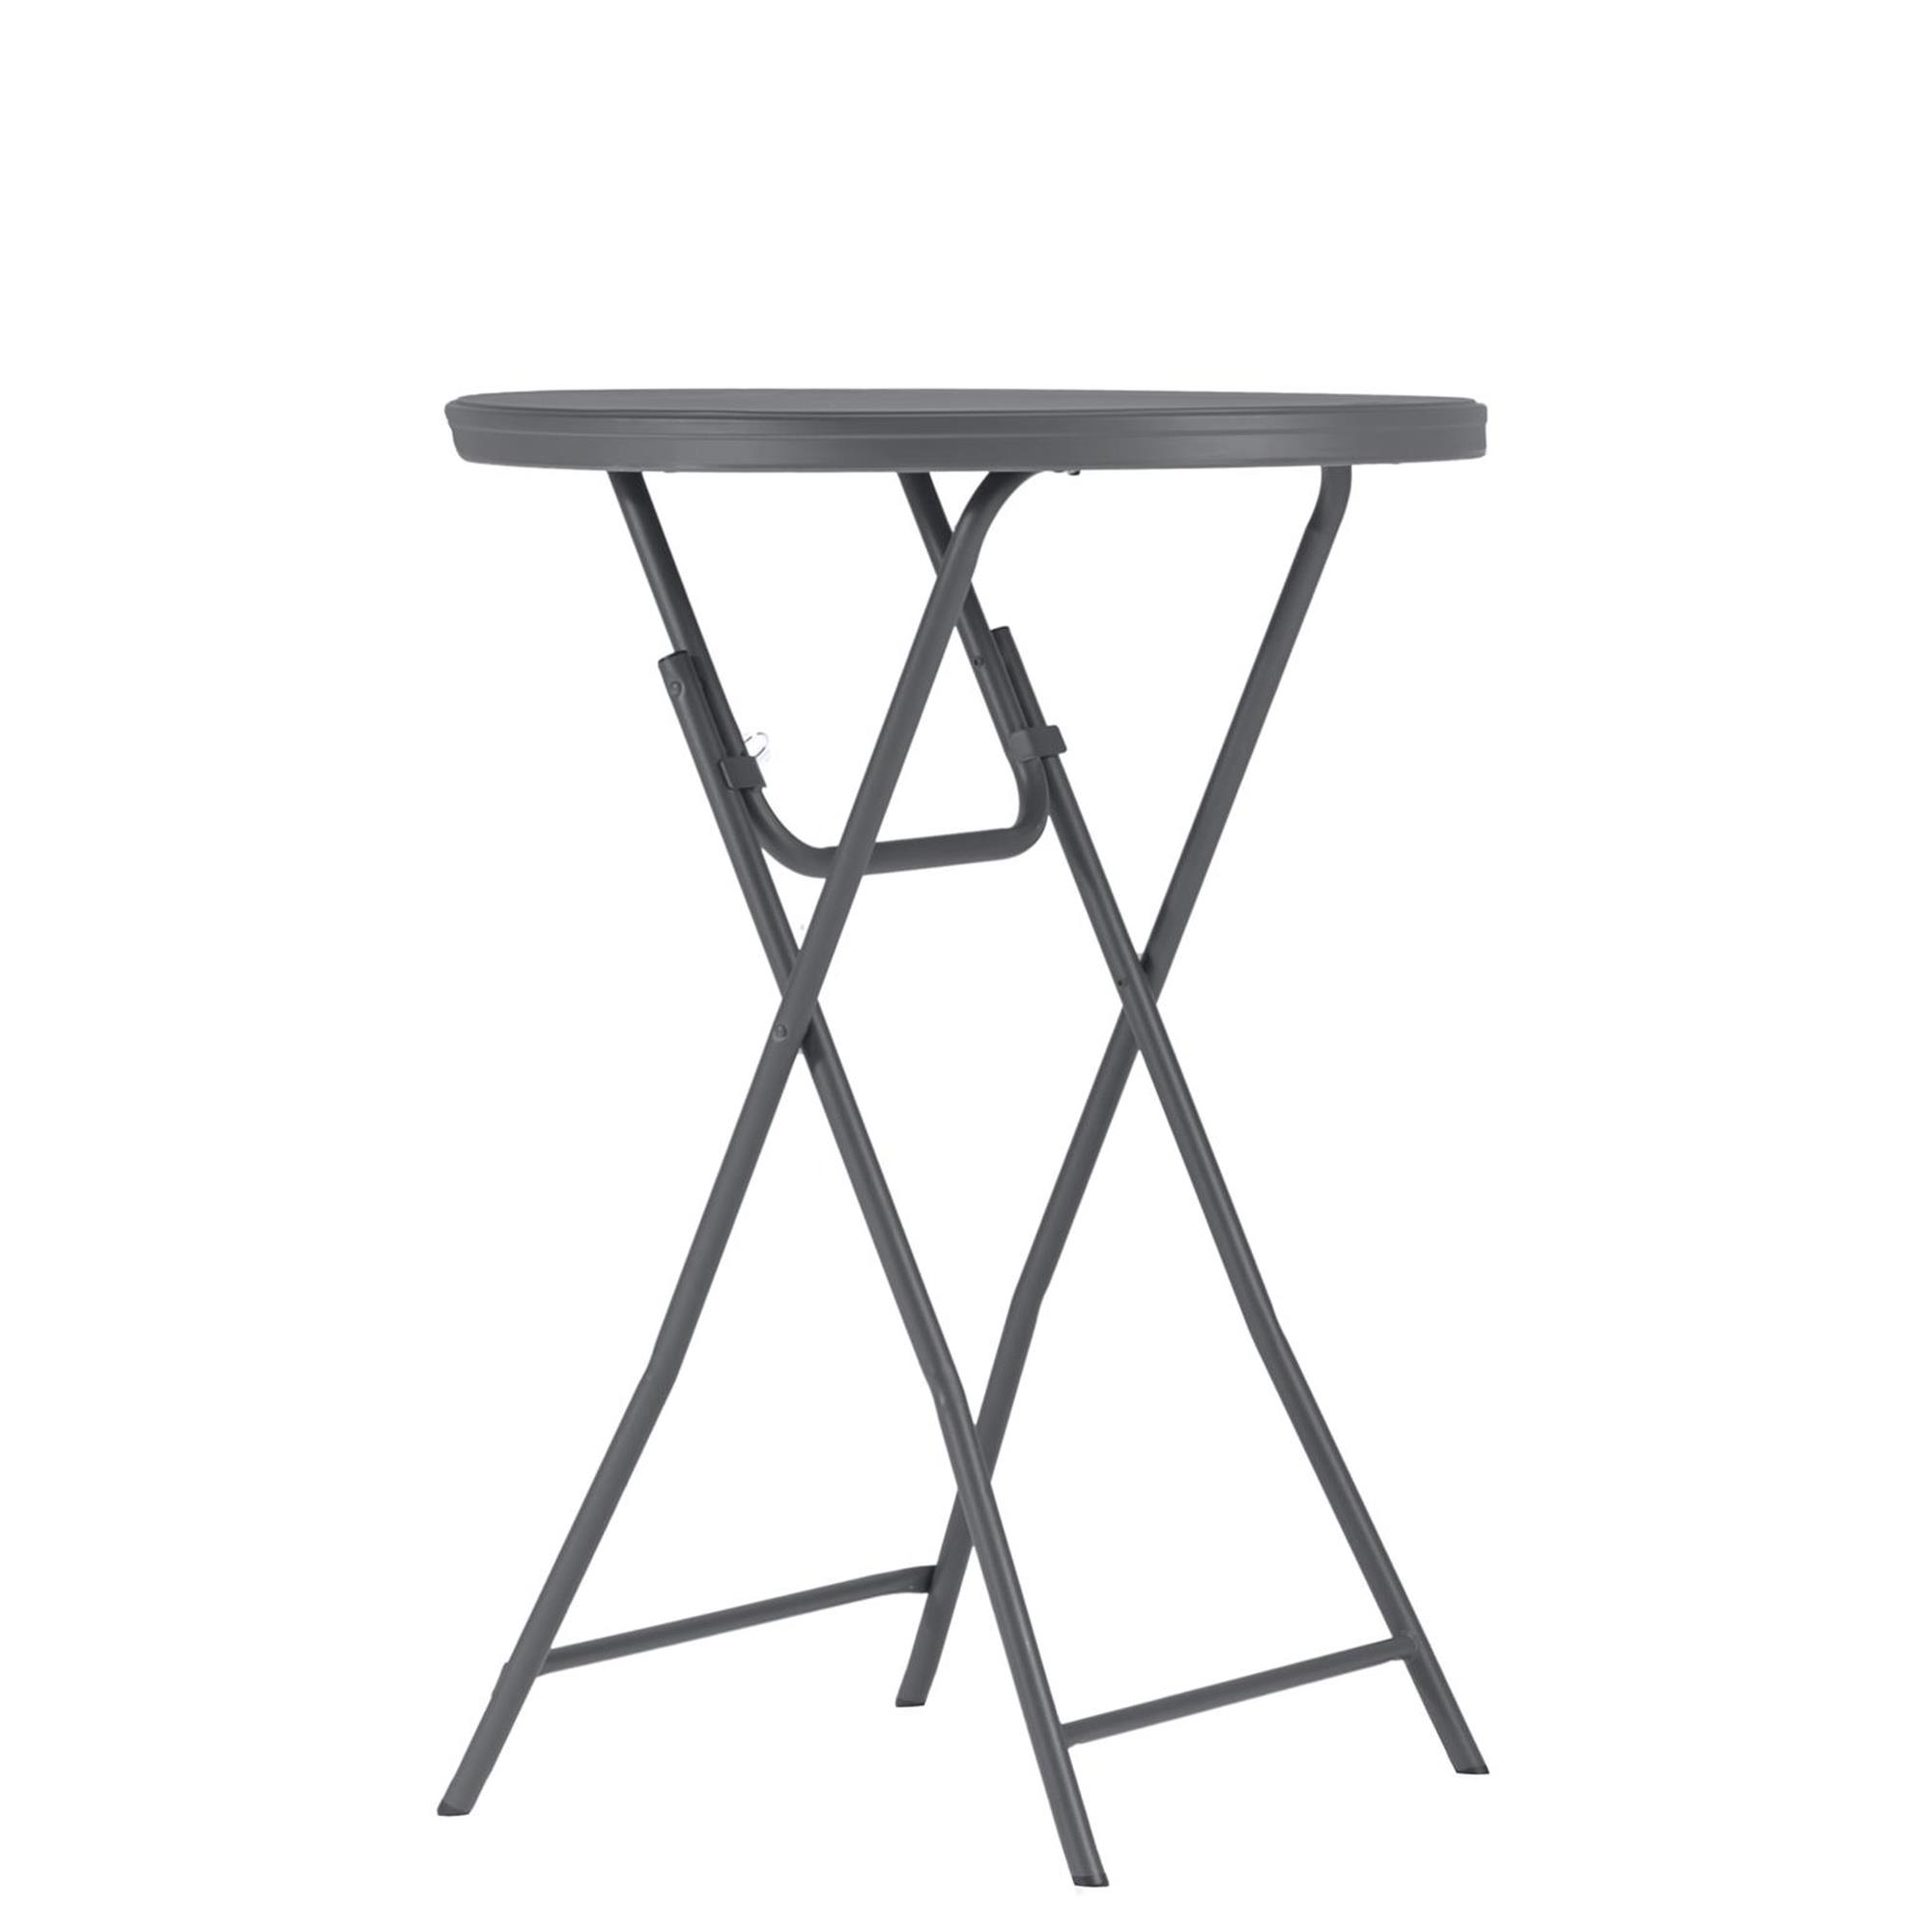 Dorel Zown Commercial Cocktail Folding Table - image 1 of 8